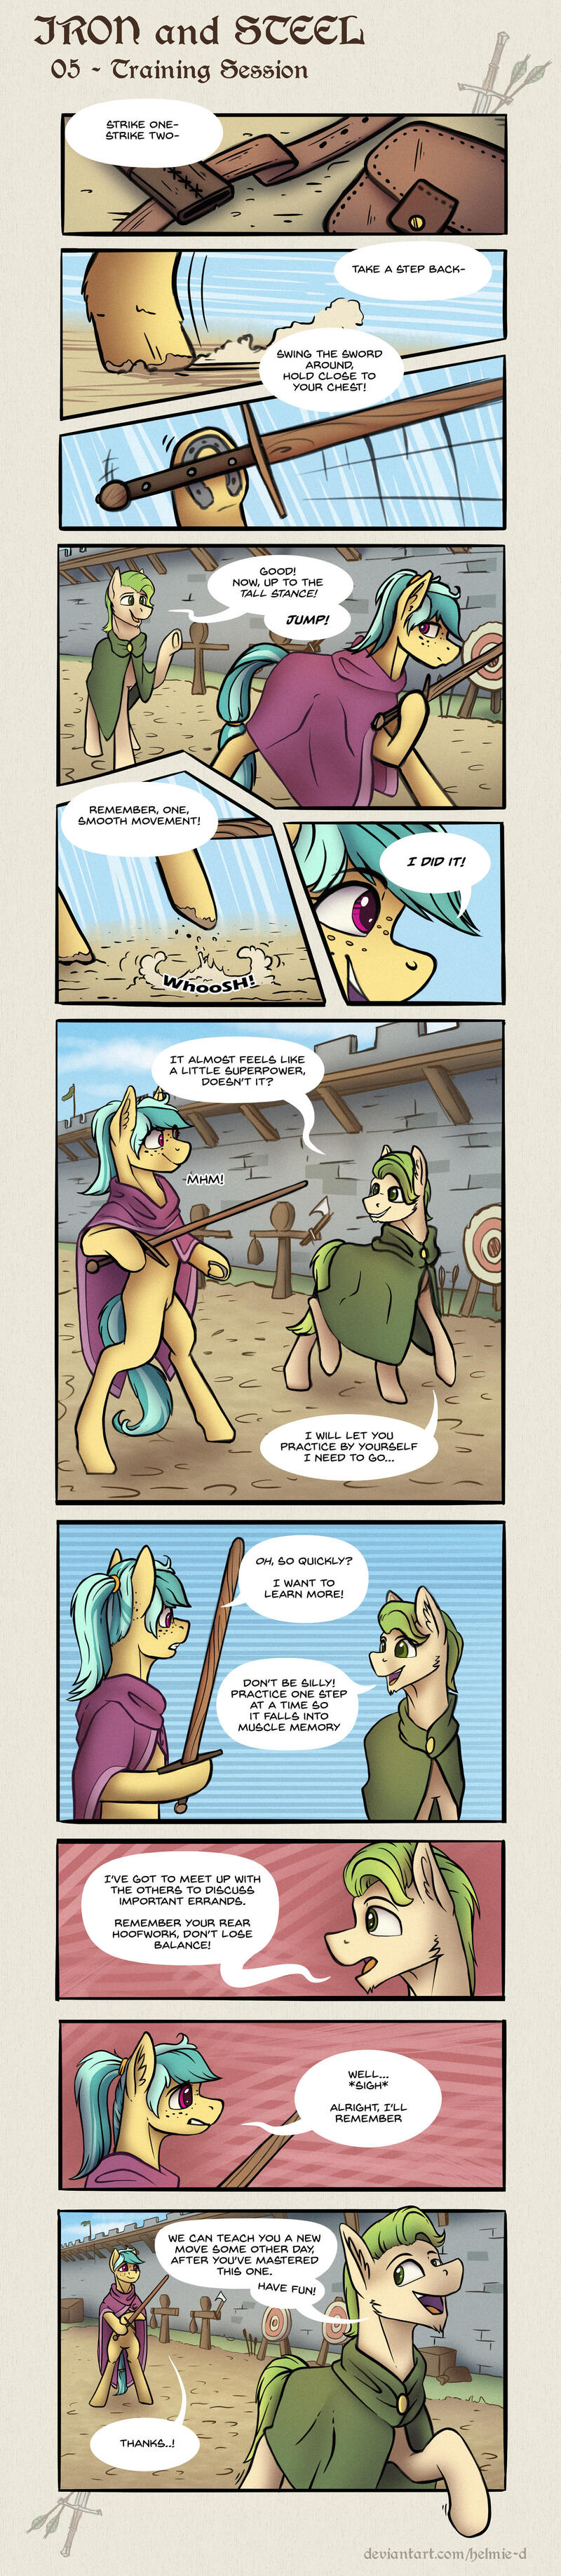 Page 7 - Training Session